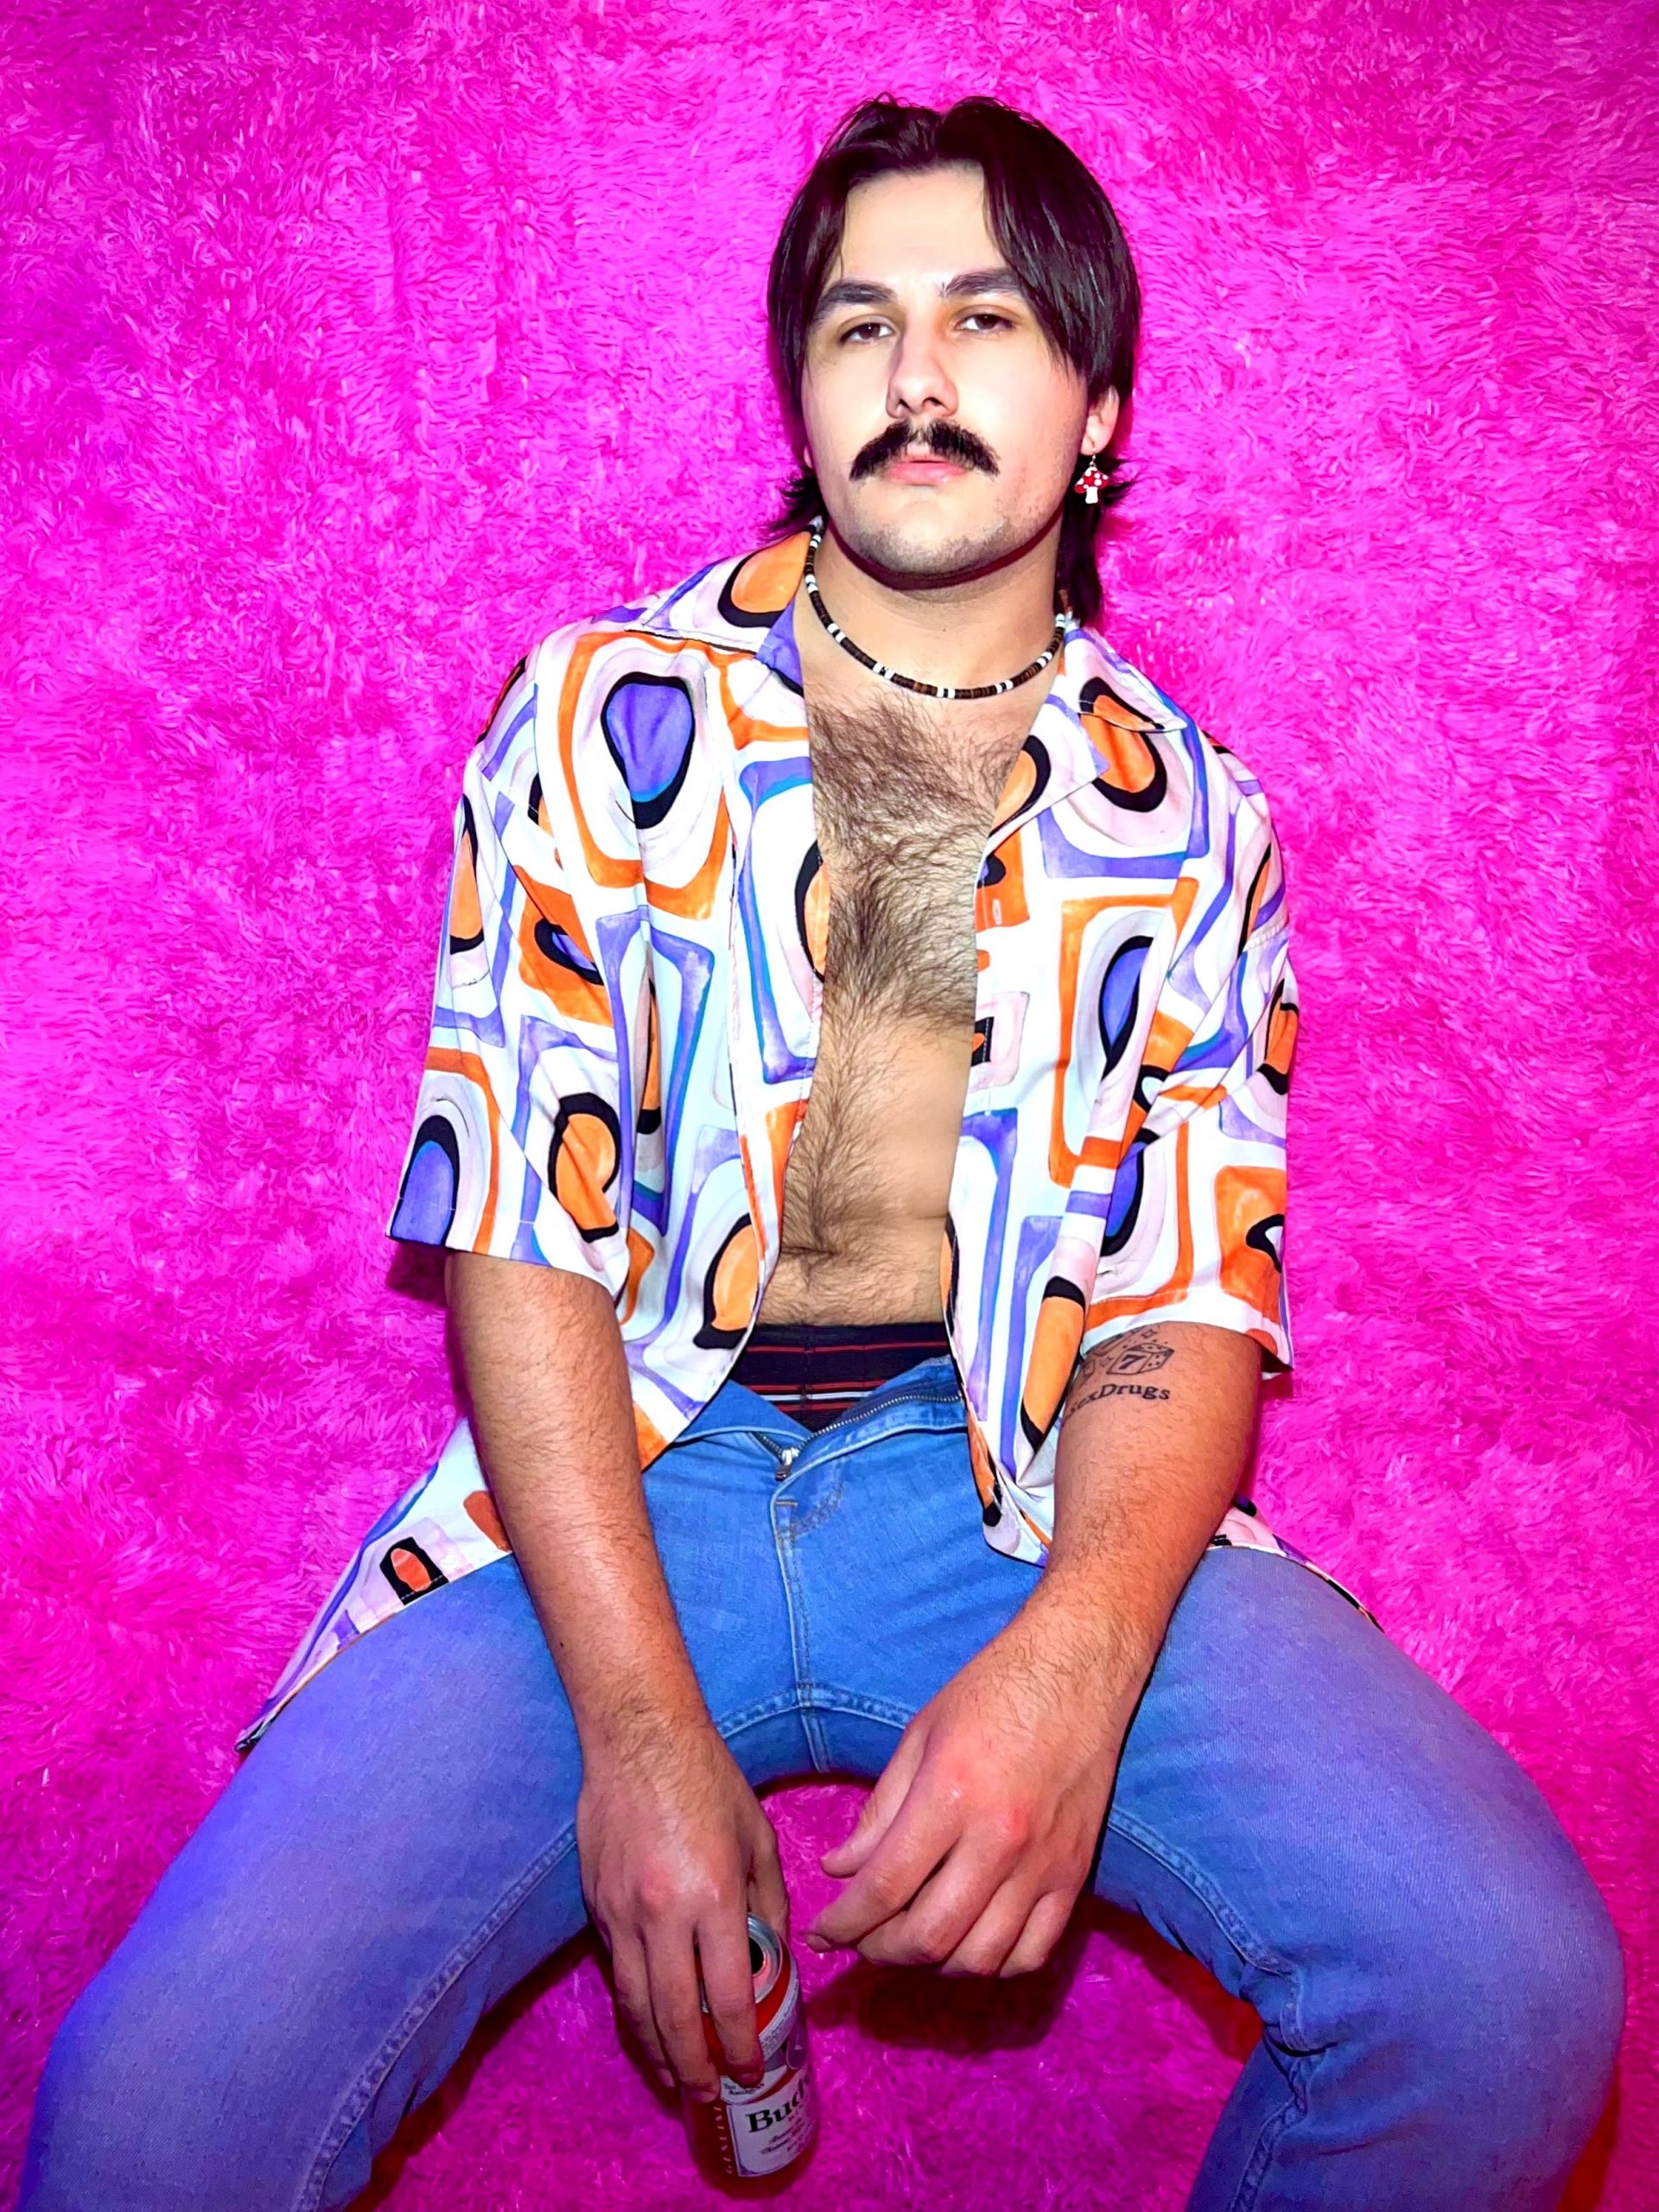 photo of Michael Medrano, a white man with shoulder length brown hair, a mustache, and a patterned shirt open over a hairy chest